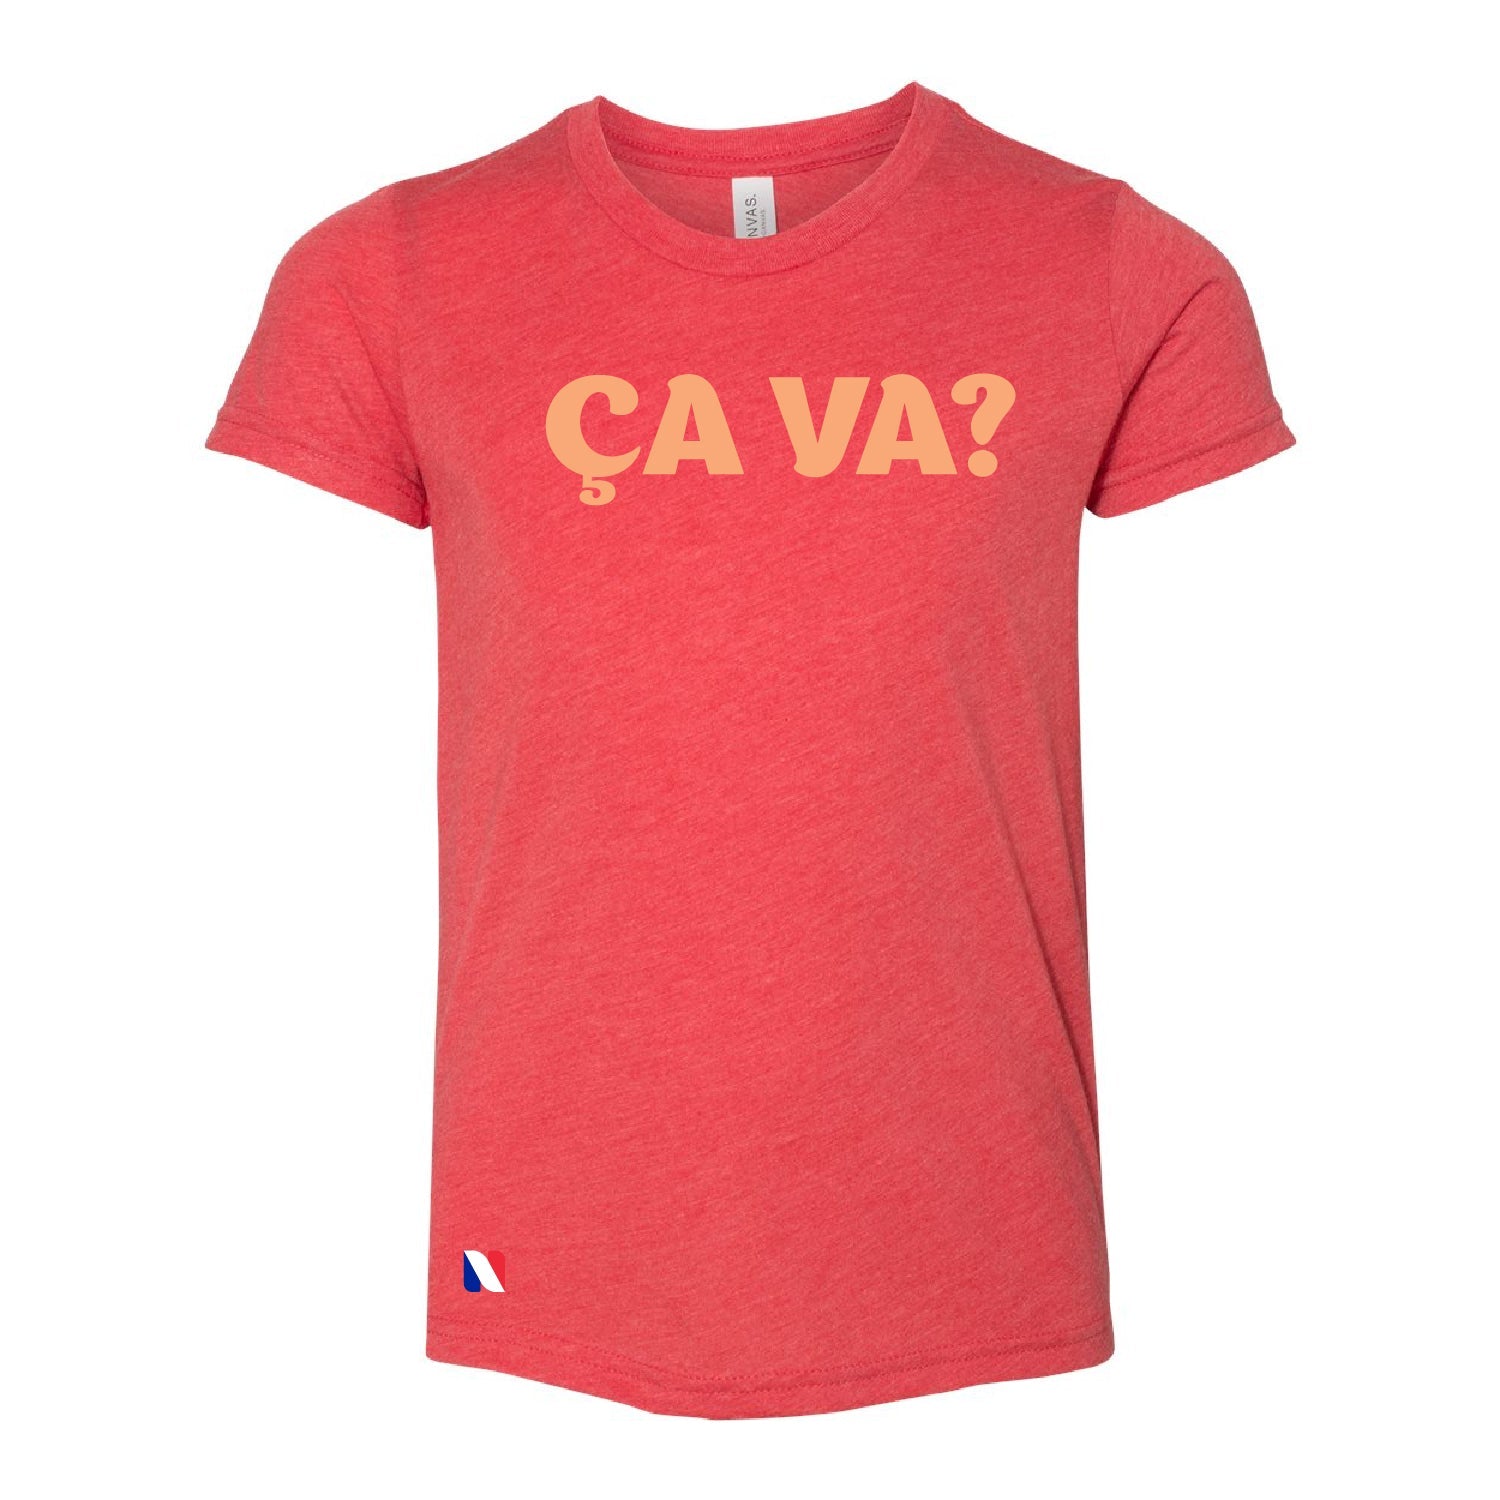 CA VA ? - YOUTH TRIBLEND TEE - DSP On Demand